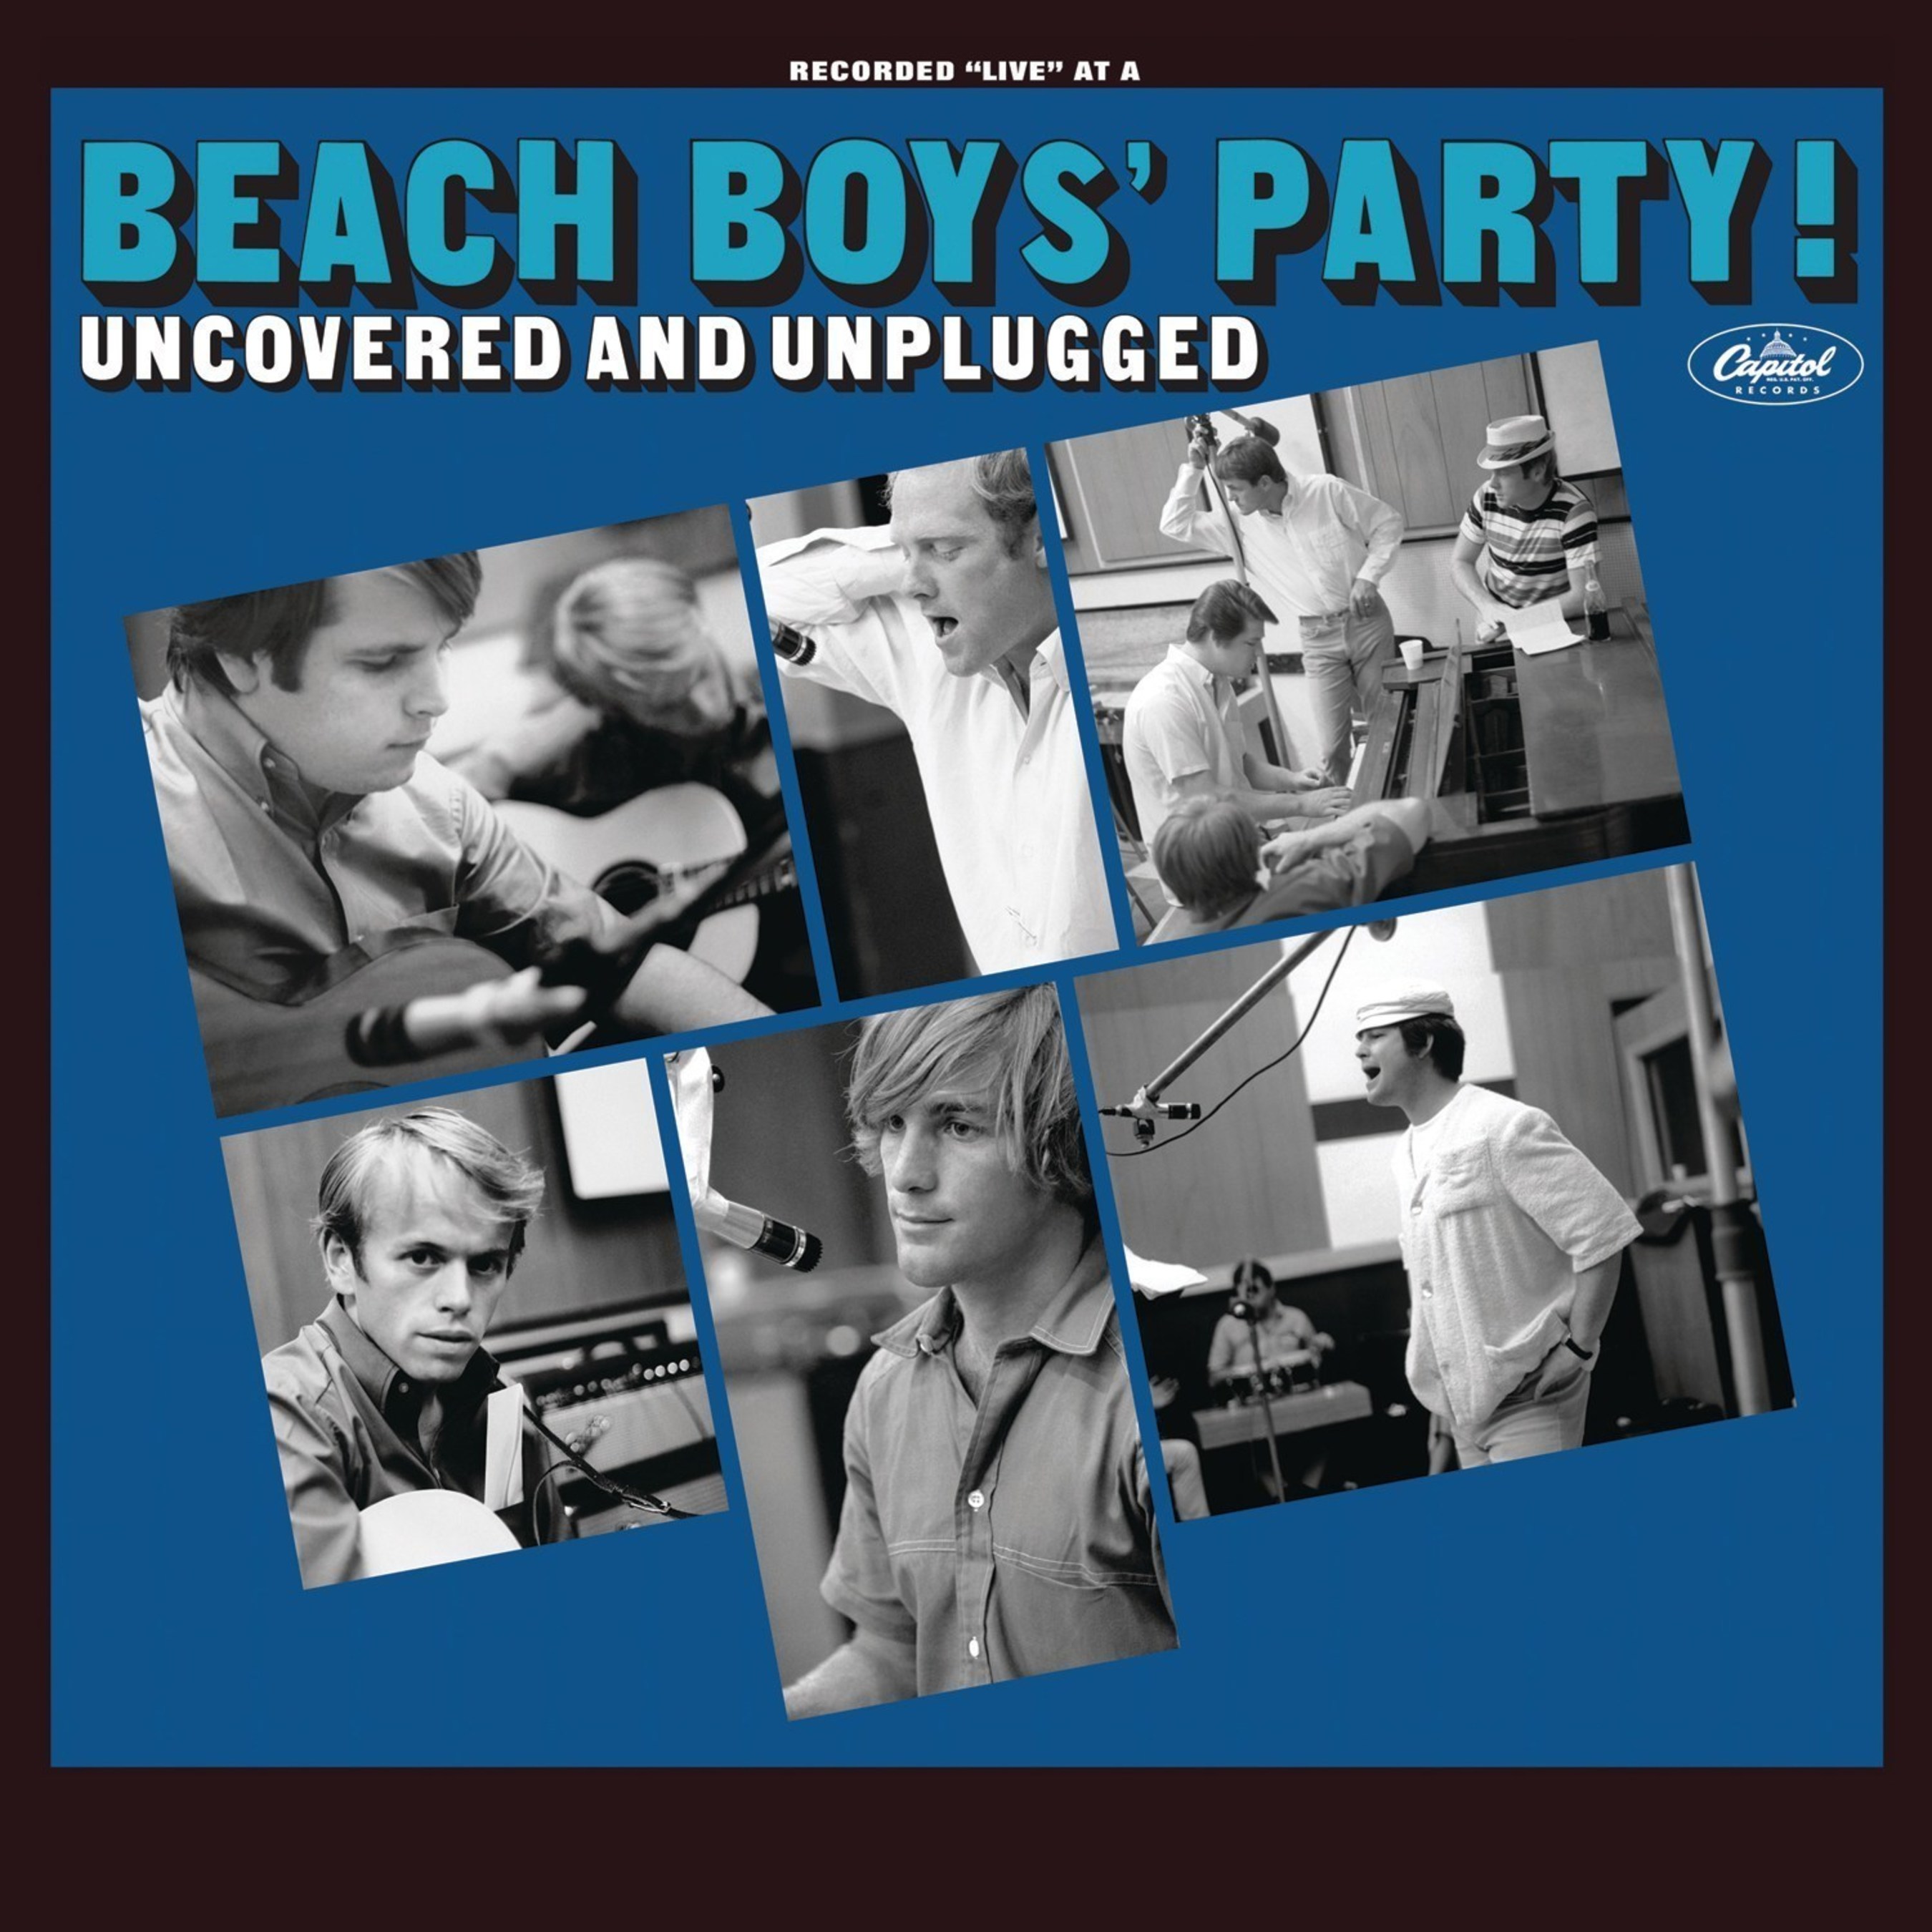 In November 1965, The Beach Boys released 'Beach Boys' Party!,' a creative and well-loved album of covers mixed with separately recorded party sounds created by the band members, their families and friends. 'Party!' was a Top 10 Billboard hit, quickly going Gold and spawning the timeless No. 2 smash hit, "Barbara Ann." To celebrate the album's 50th anniversary, The Beach Boys have overseen a remixed, remastered and expanded edition for release on November 20. 'Beach Boys' Party! Uncovered and Unplugged' removes the overdubbed 'party' sounds and adds 69 more songs and dialog tracks culled from the recording sessions.